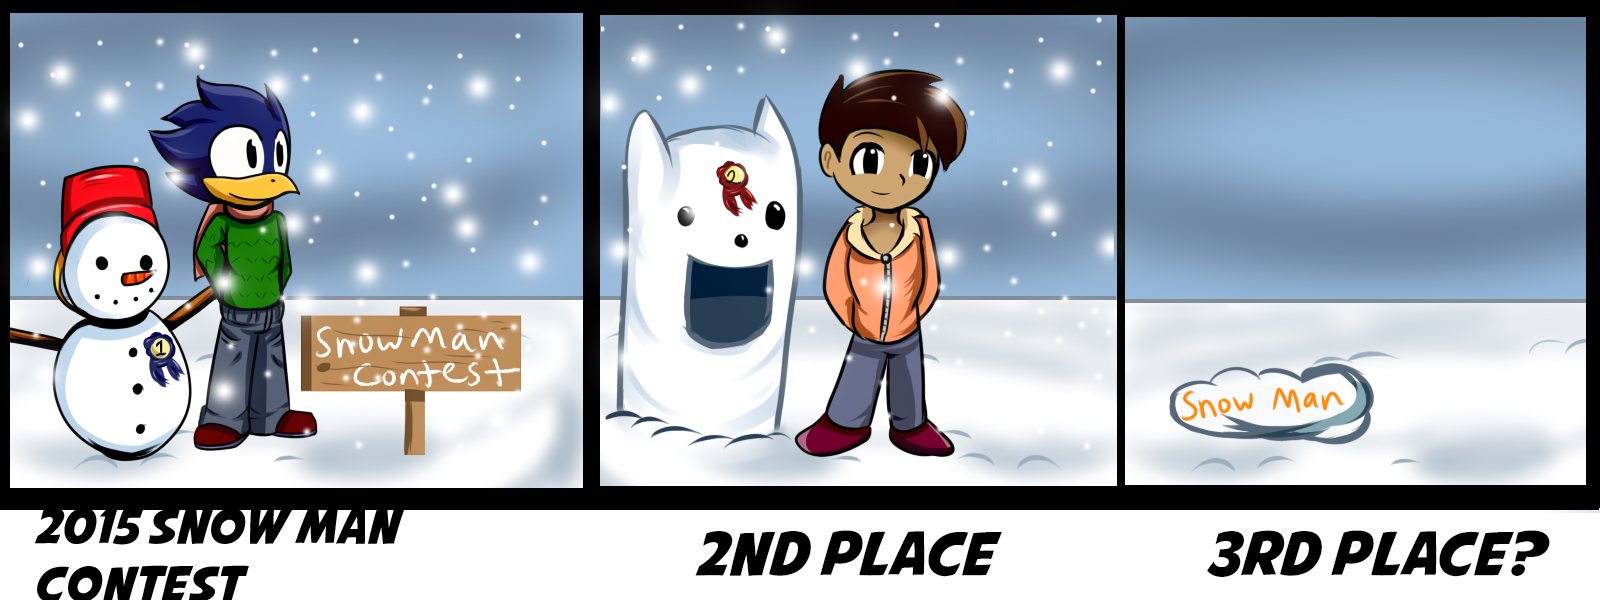 Panel one: Lil' Hawkster has a cute little snowman with a red hat, a bucket, and stick arms. It has a first place ribbon. Panel two: A snow creature, little ears, giant mouth gaping and smiling. A boy stands next to it. It has a second place ribbon. Third panel: A flat pile of snow has 'snow man' written on it. The writing is yellow.